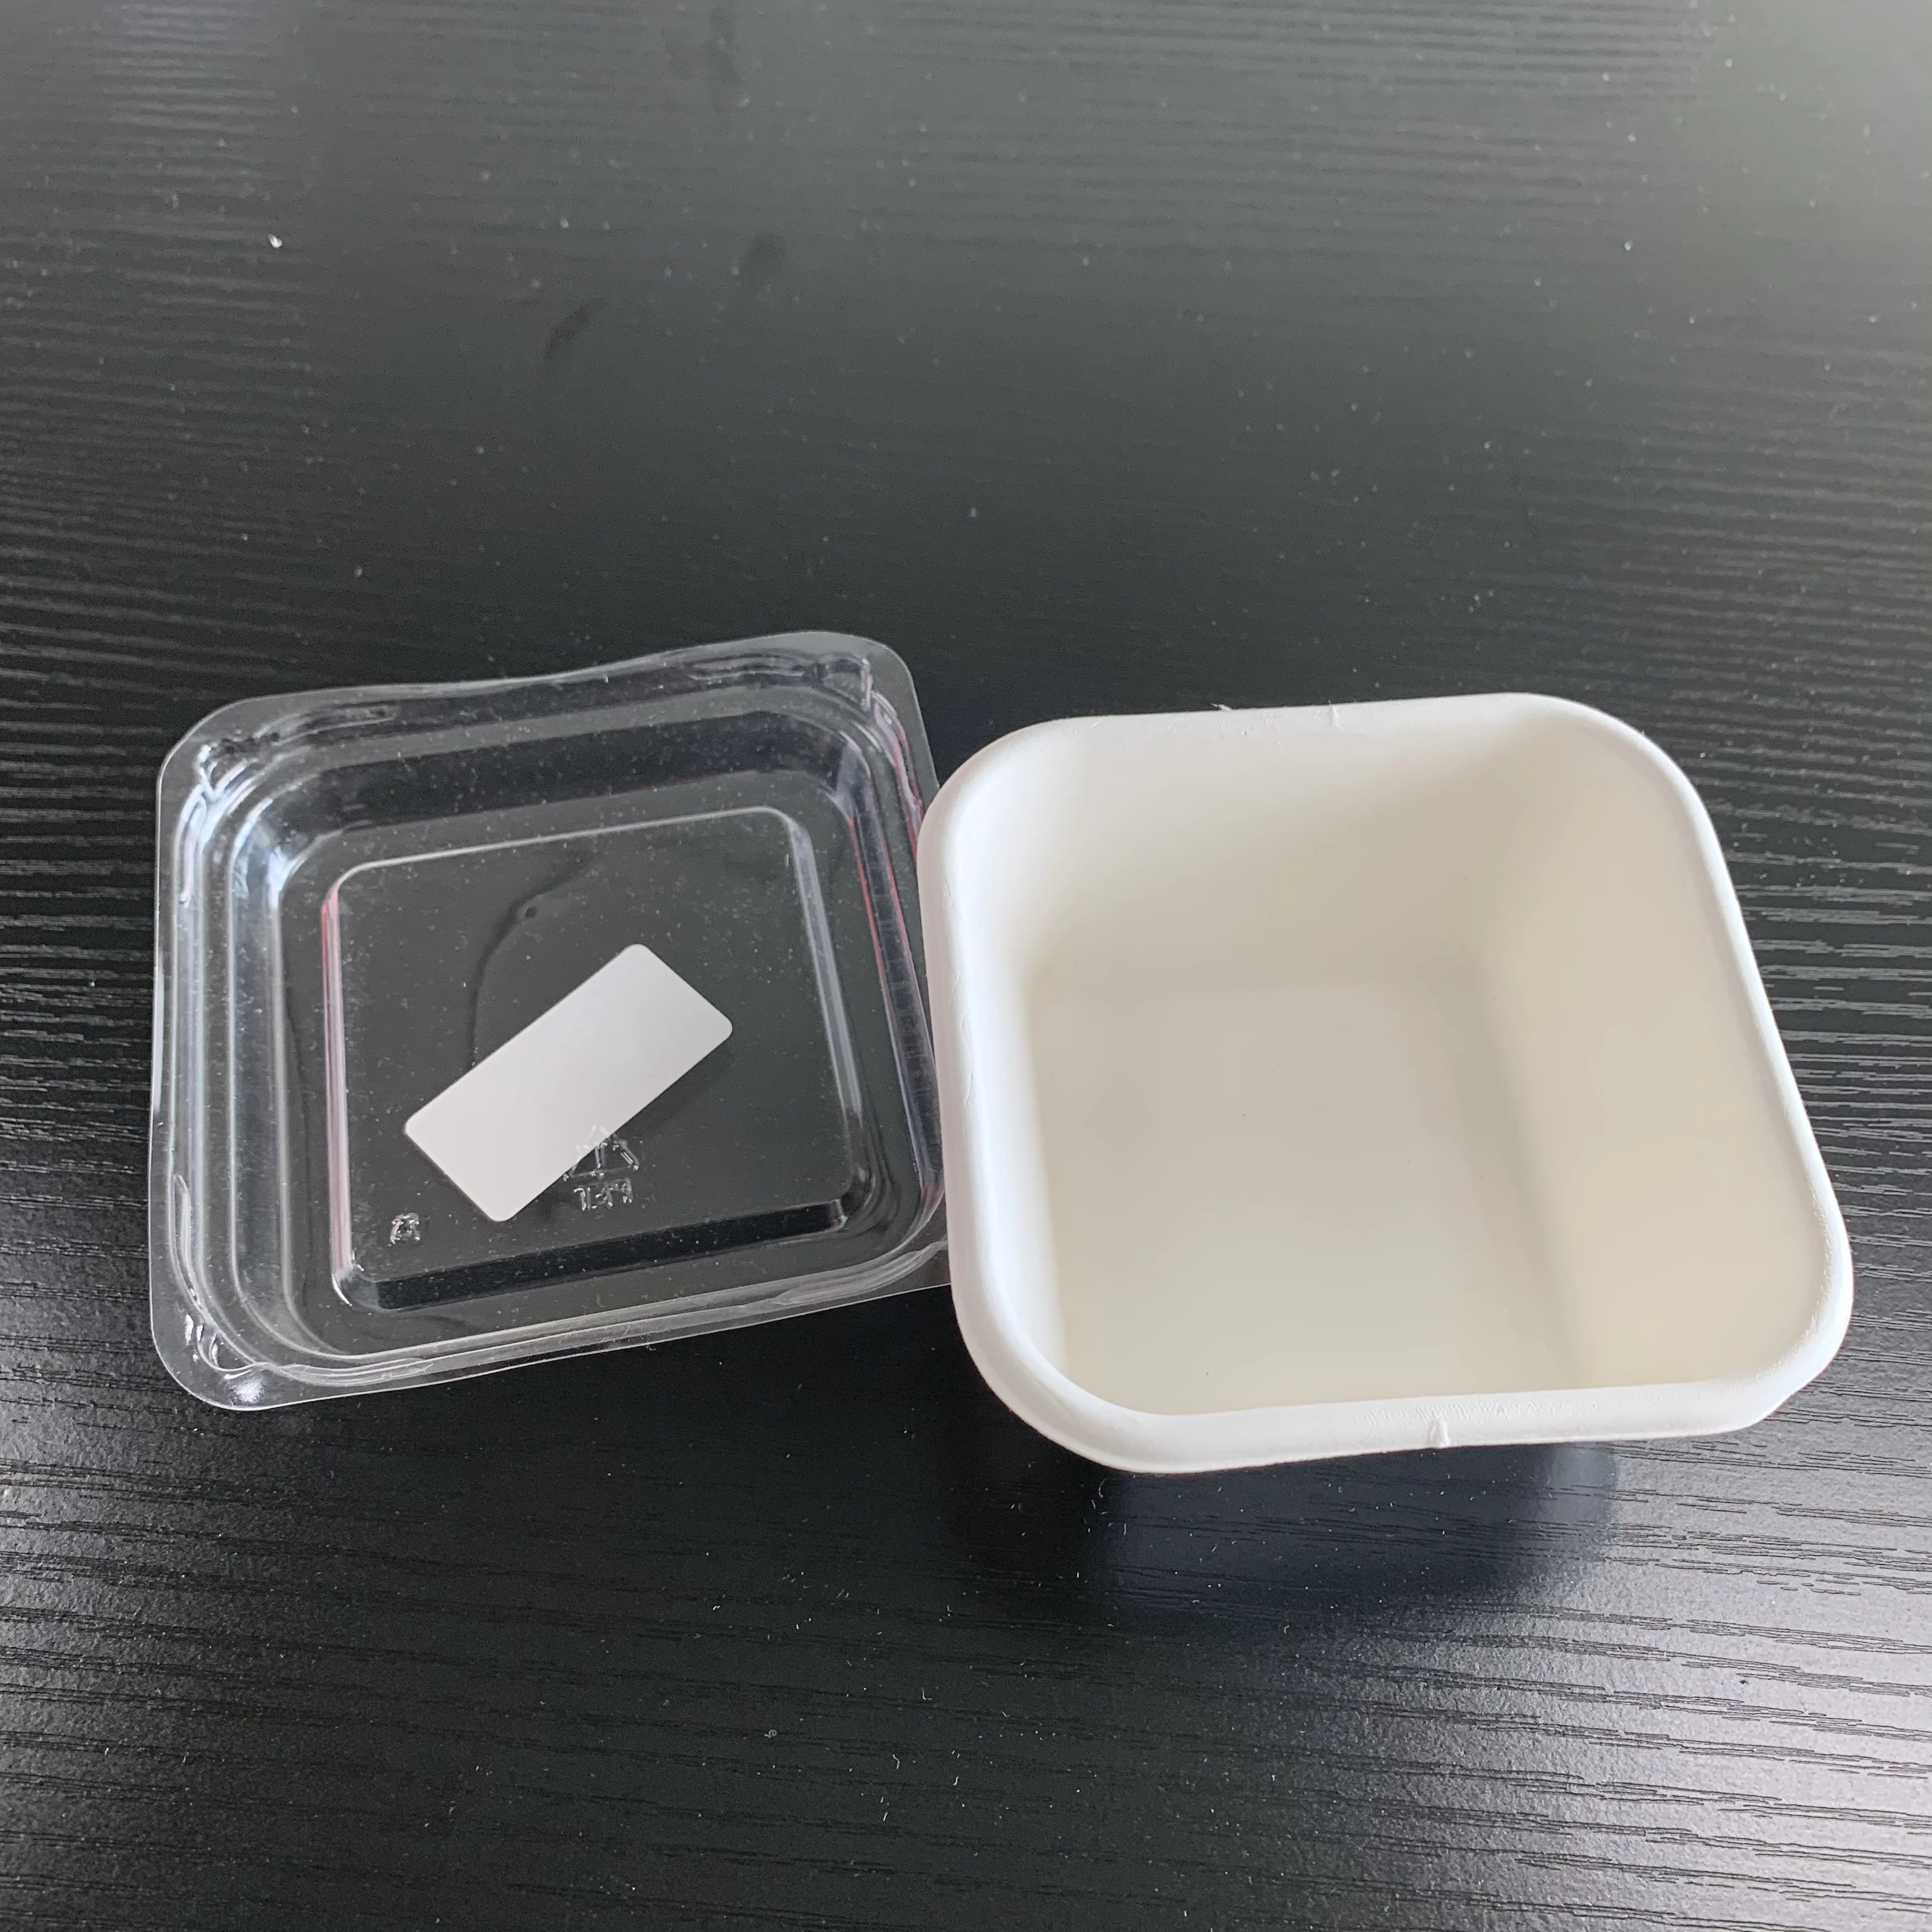 

2021 Biodegradable Sugarcane Takeaway Take Out Fast Food Packaging Box Food Containers Biodegradable Packaging, White color